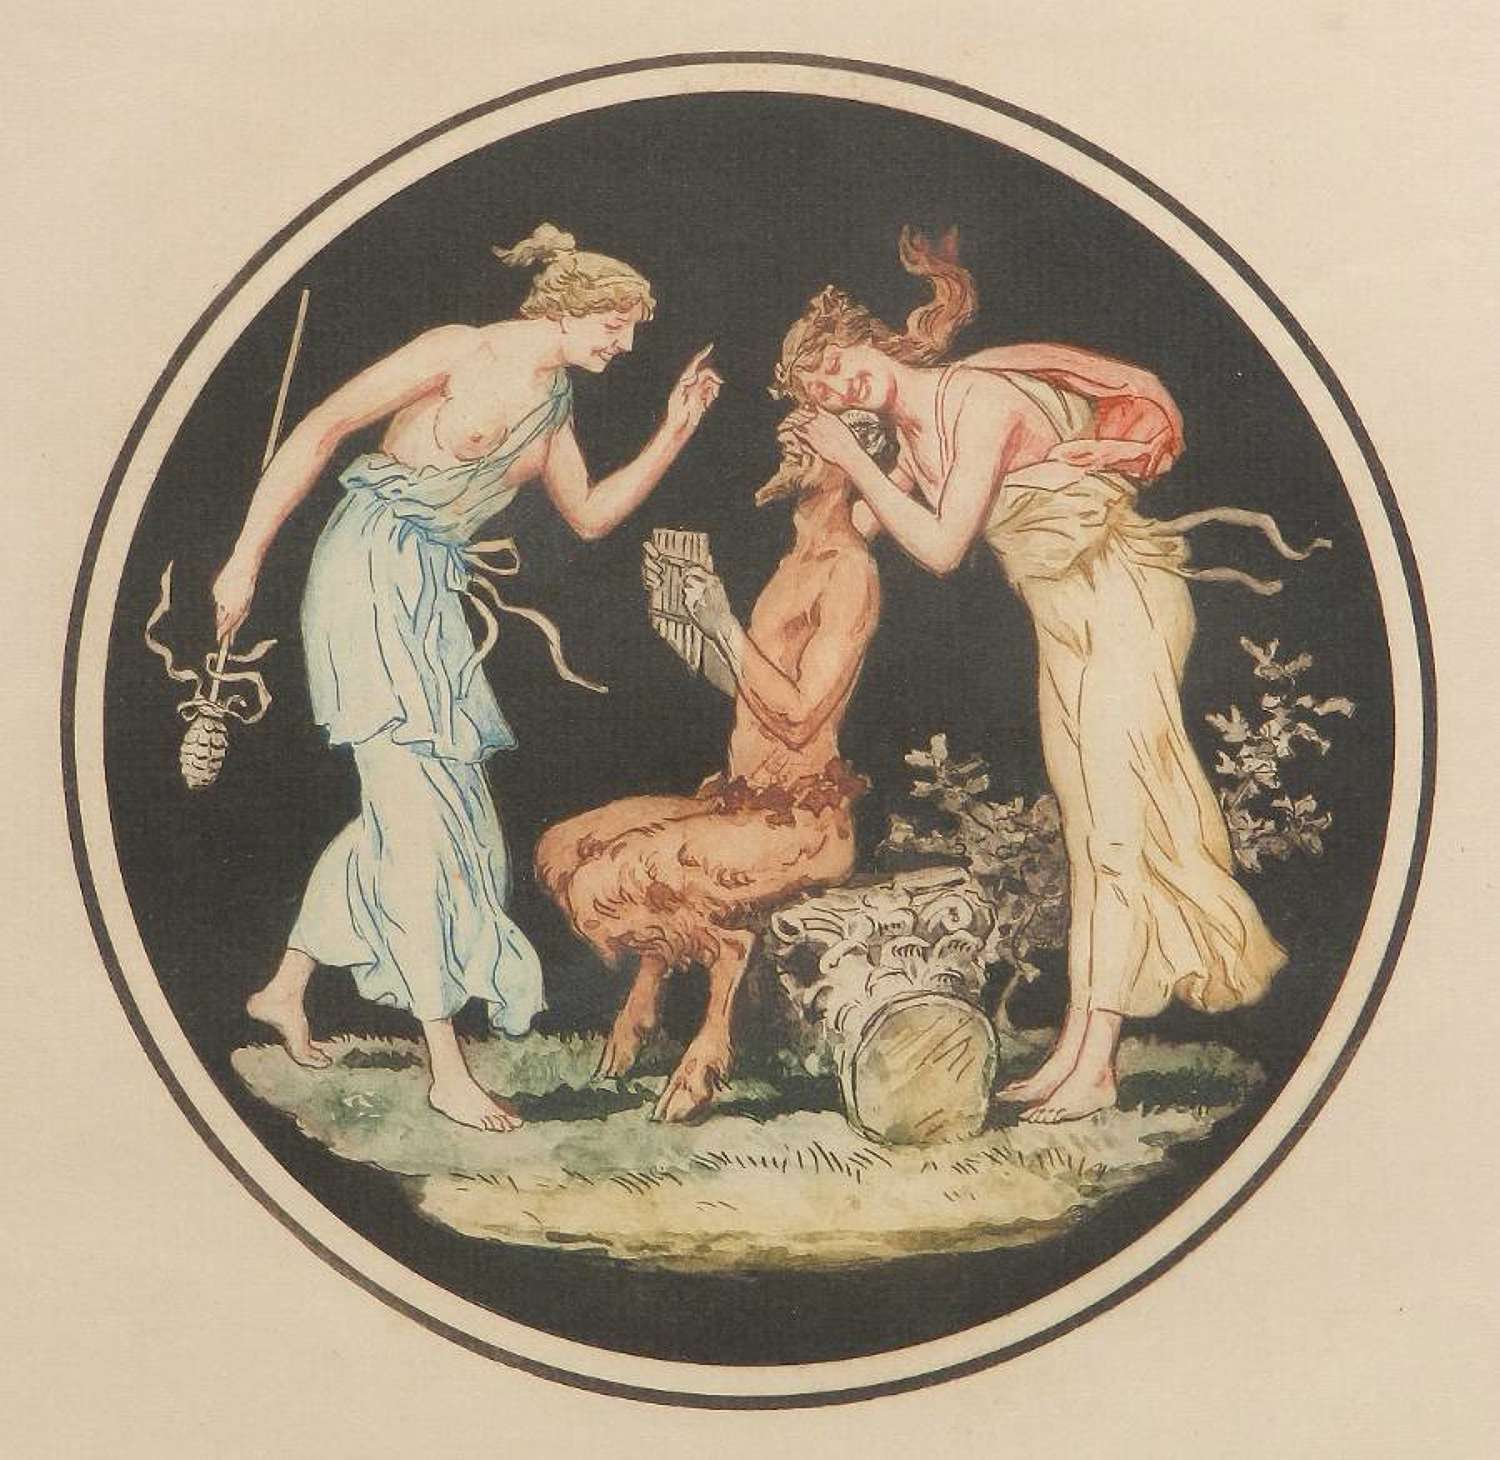 Engraving Pan Nymphs Allegorical Decorative French Print after Jean Gu